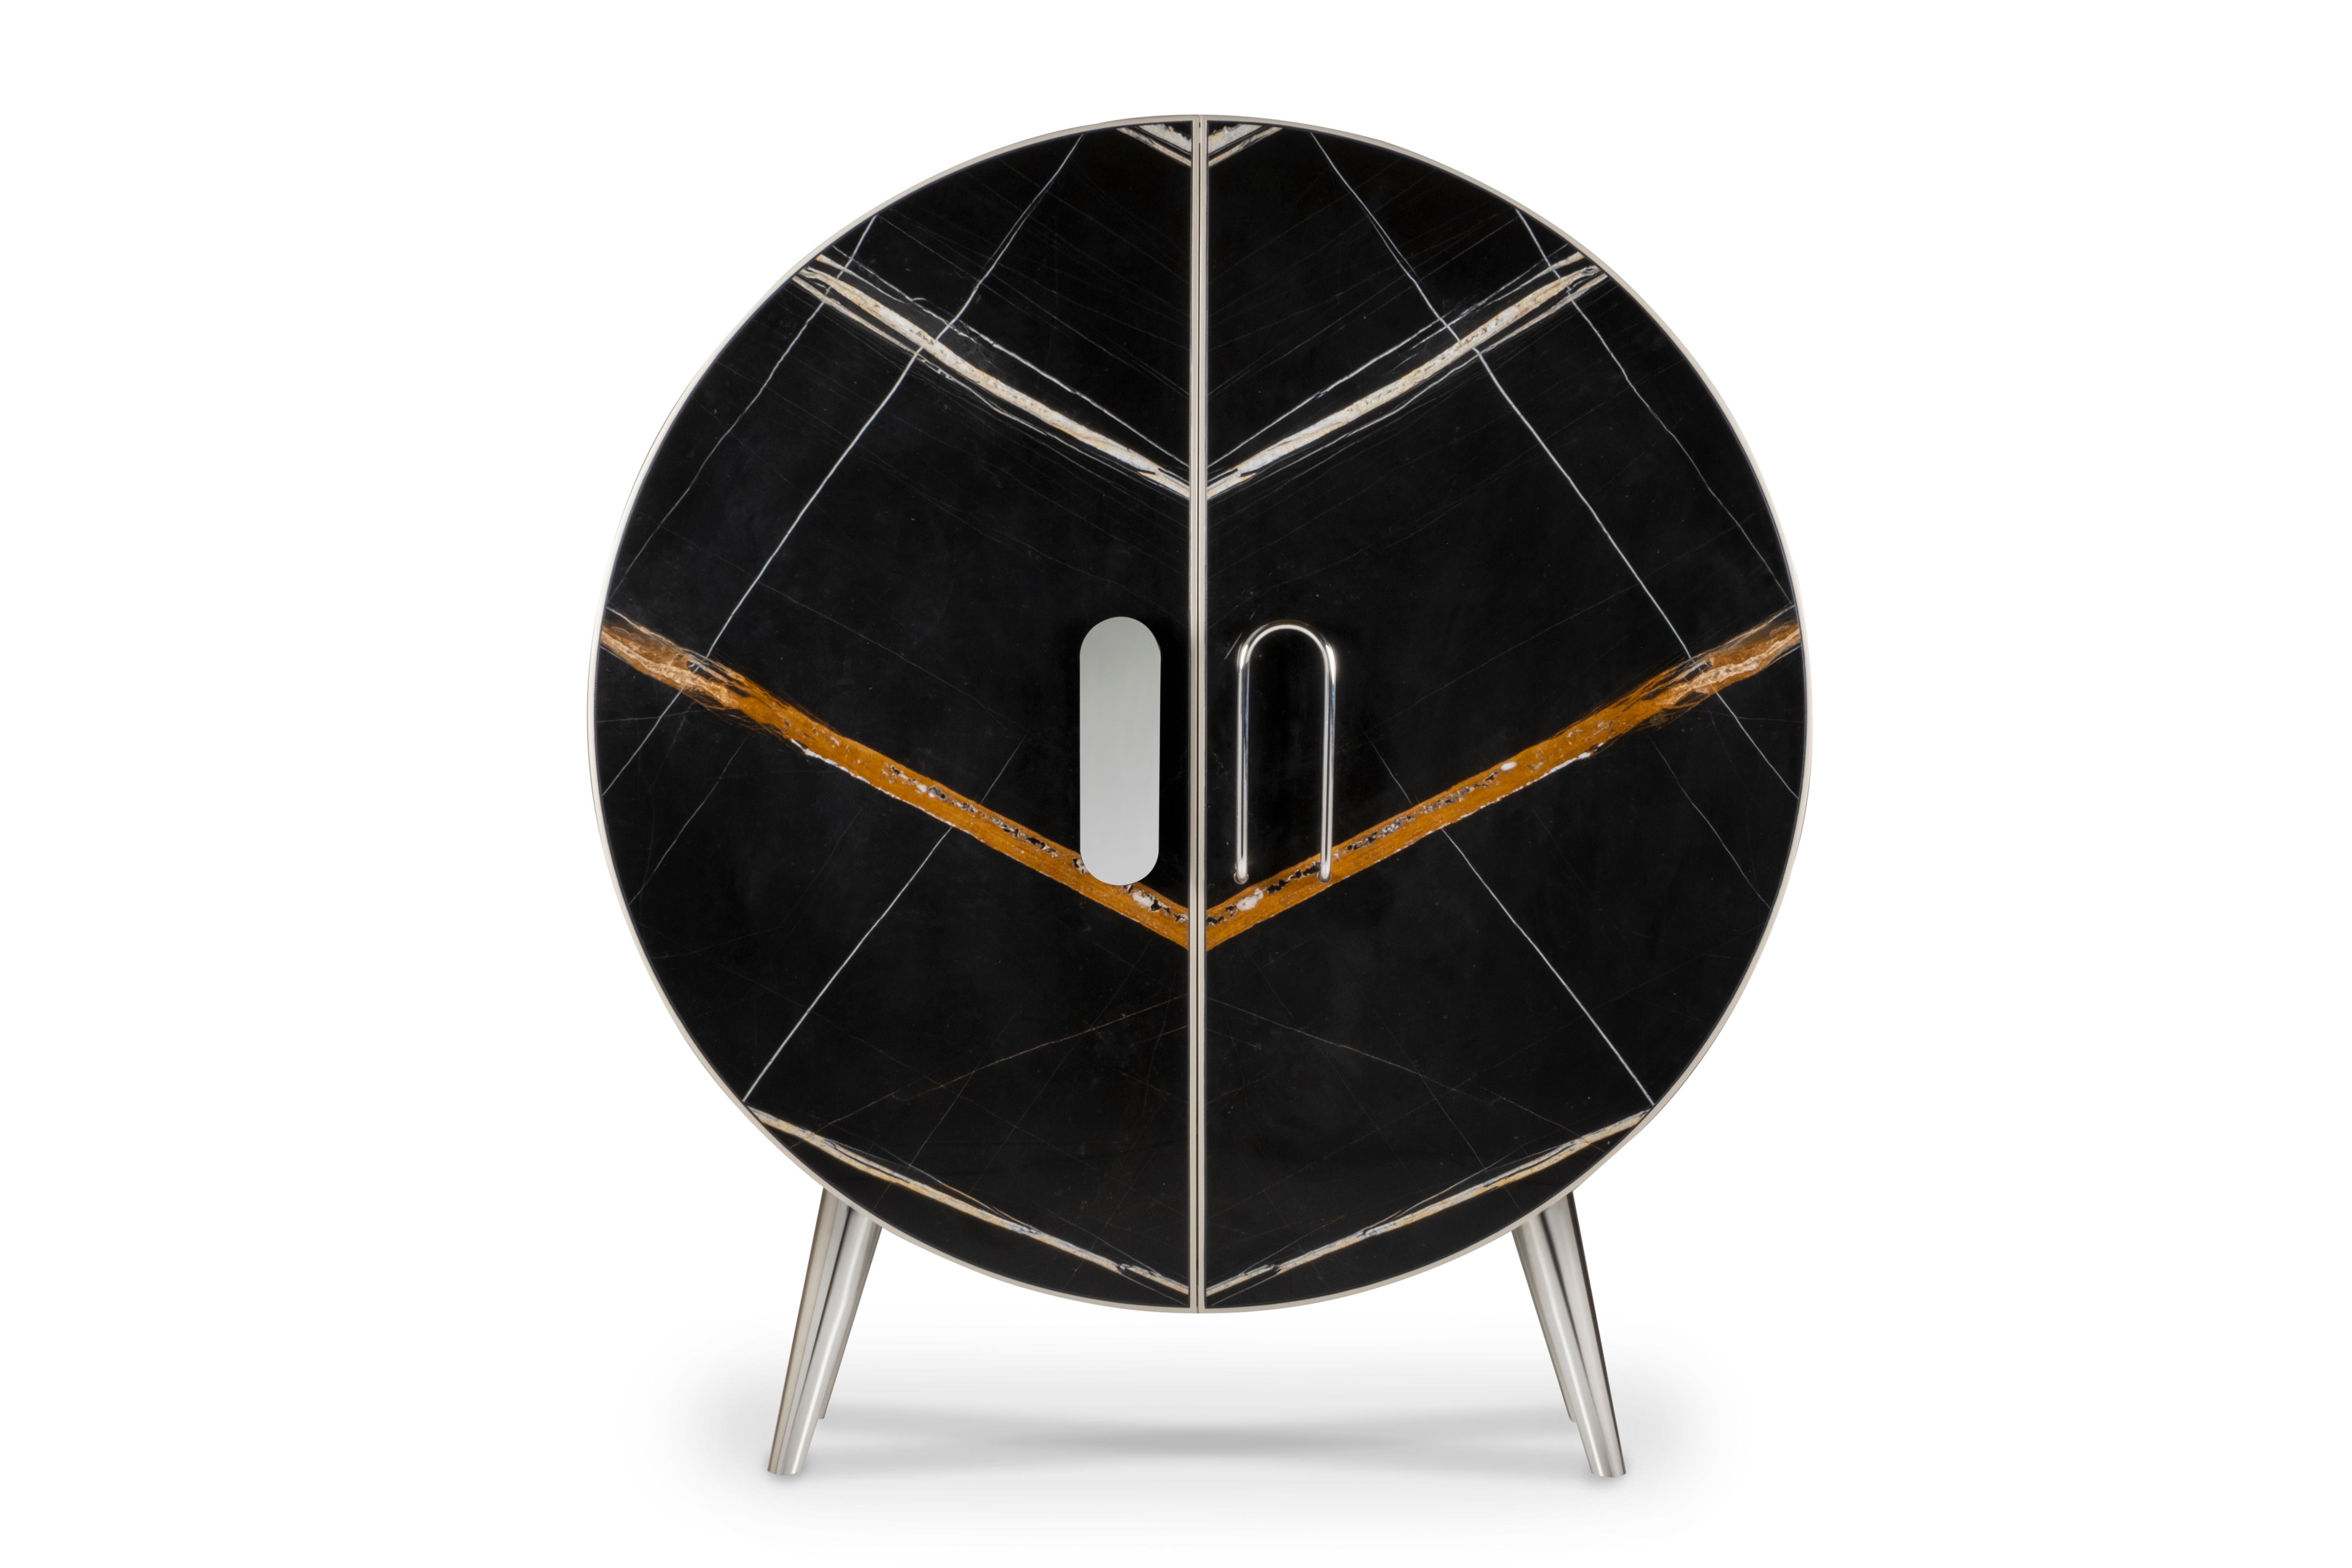 Bongó Closet, Contemporary Collection, Handcrafted in Portugal - Europe by Greenapple.

Designed by Rute Martins for the Contemporary Collection, the Bongó closet in Sahara Noir marble is a statement piece of unparalleled luxury. Like the echo of a